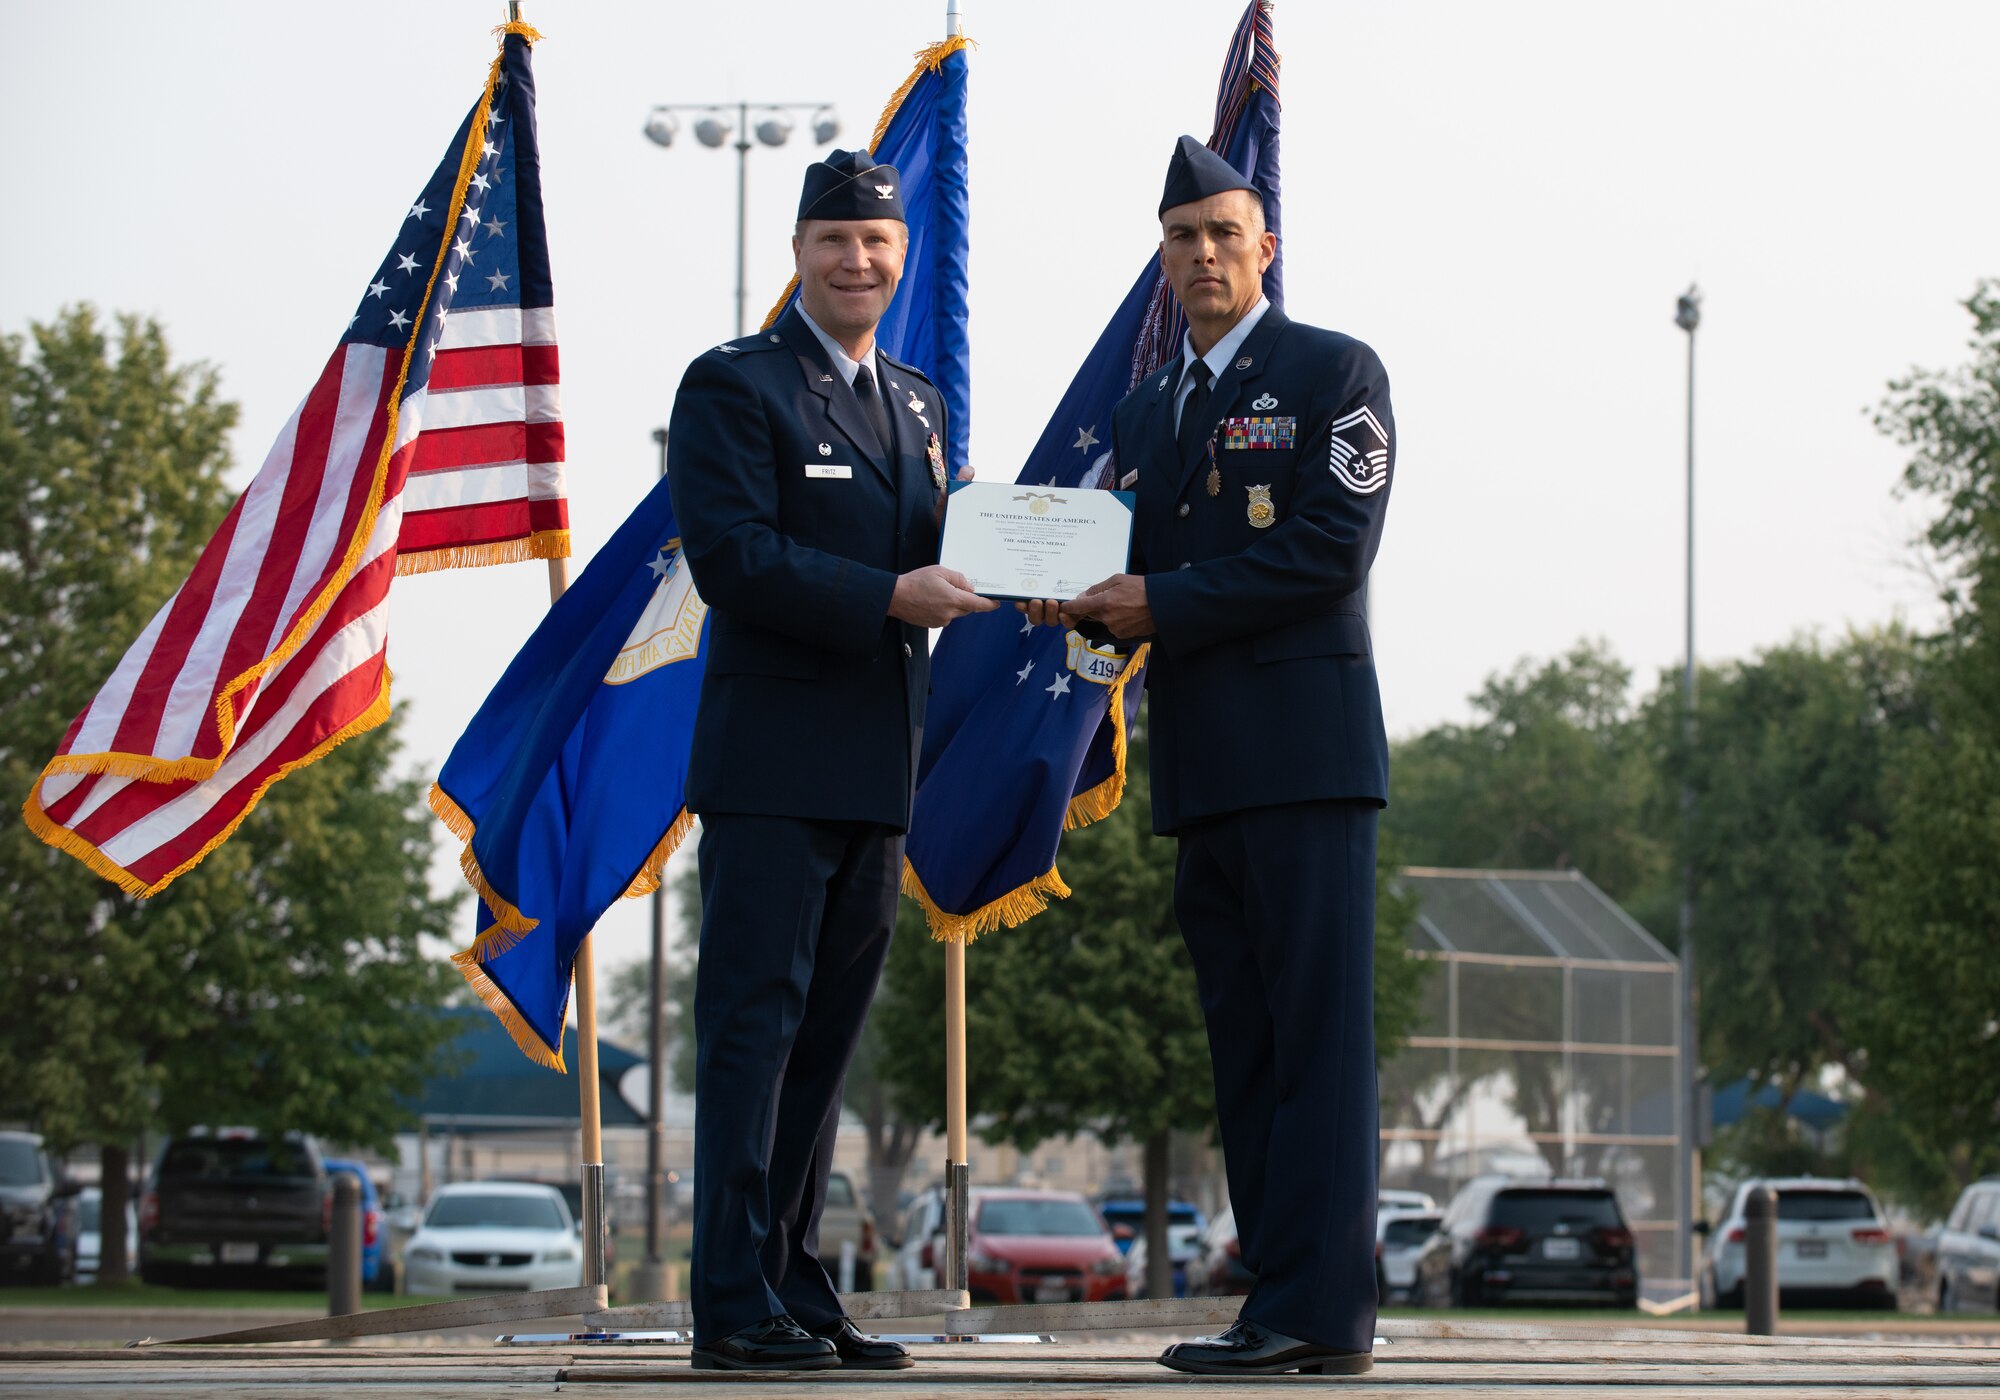 U.S. Air Force Senior Master Sgt. Chad Carrier, 419th Civil Engineer Squadron, receives the Airman’s Medal from Col. Matthew Fritz, 419th Fighter Wing commander, during a ceremony at Hill Air Force Base, Utah on July 11, 2021. Carrier displayed exemplary heroism actions when he saved the life of a trapped driver by pulling him from a burning vehicle.